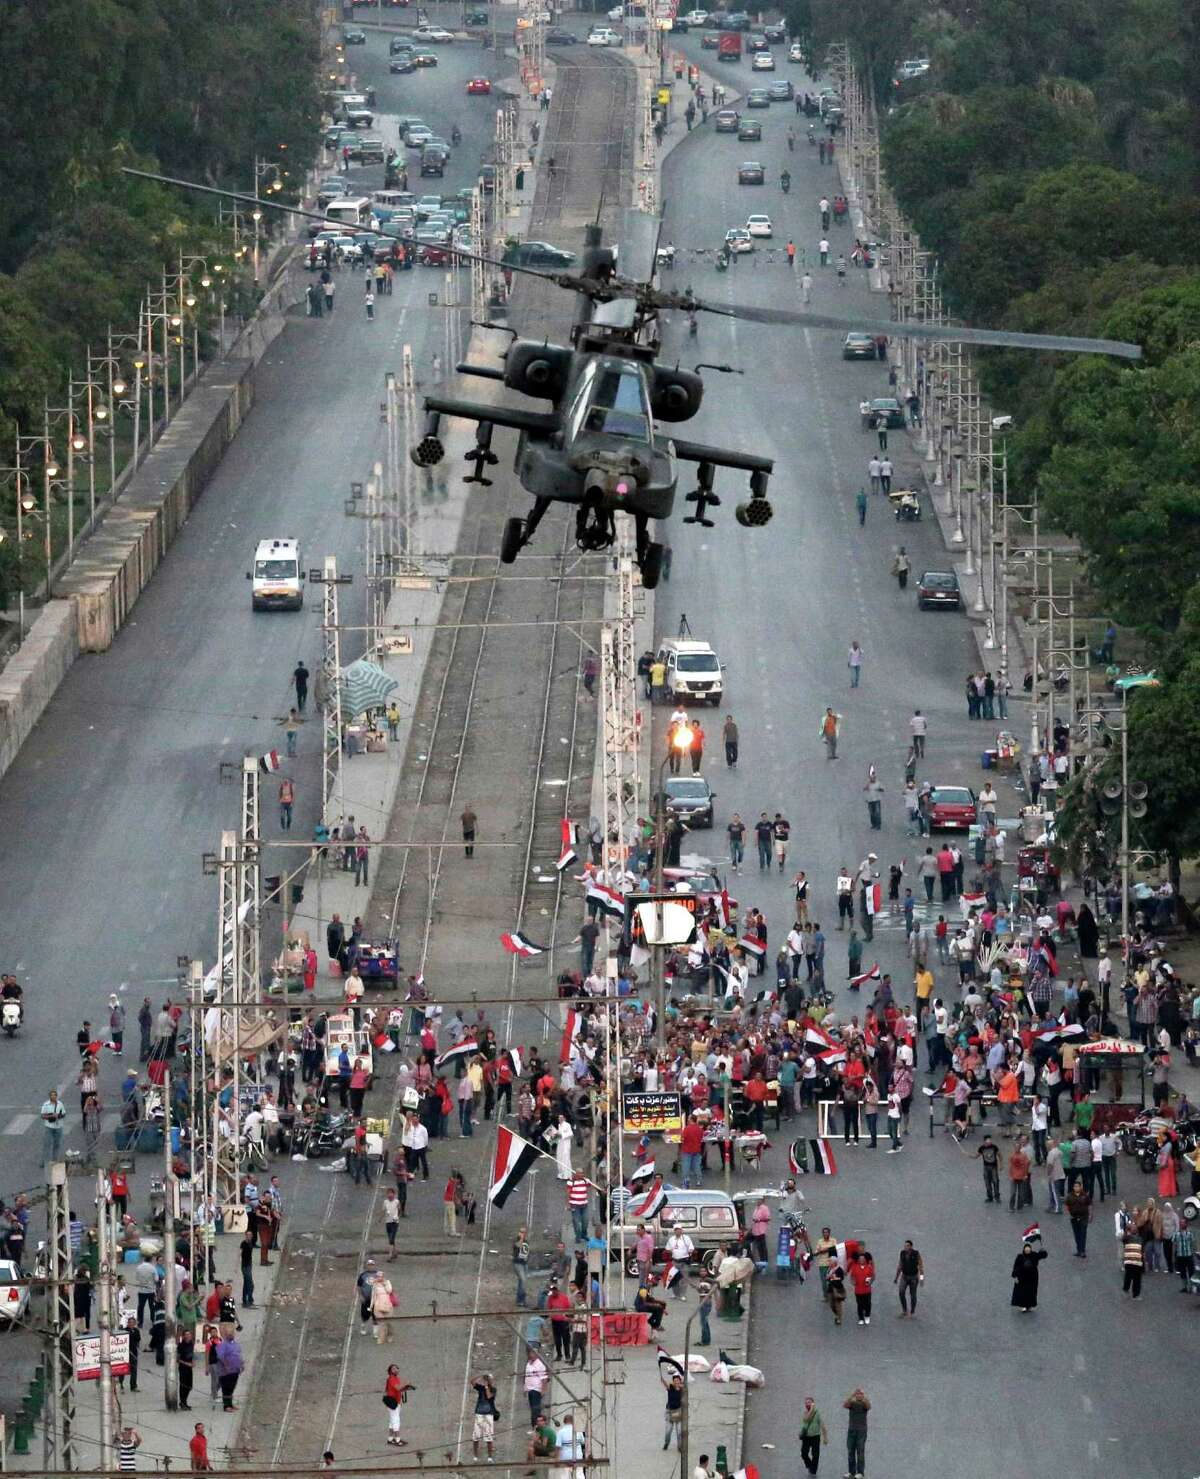 A military attack helicopter flies over a street Friday near the presidential palace, in Cairo, Egypt. The top leader of Egypt's Muslim Brotherhood has vowed to restore ousted President Mohammed Morsi to office, saying Egyptians will not accept "military rule" for another day. General Guide Mohammed Badie, a revered figure among the Brotherhood's followers, spoke Friday before a crowd of tens of thousands of Morsi supporters in Cairo. A military helicopter circled low overhead. (AP Photo/Hassan Ammar)